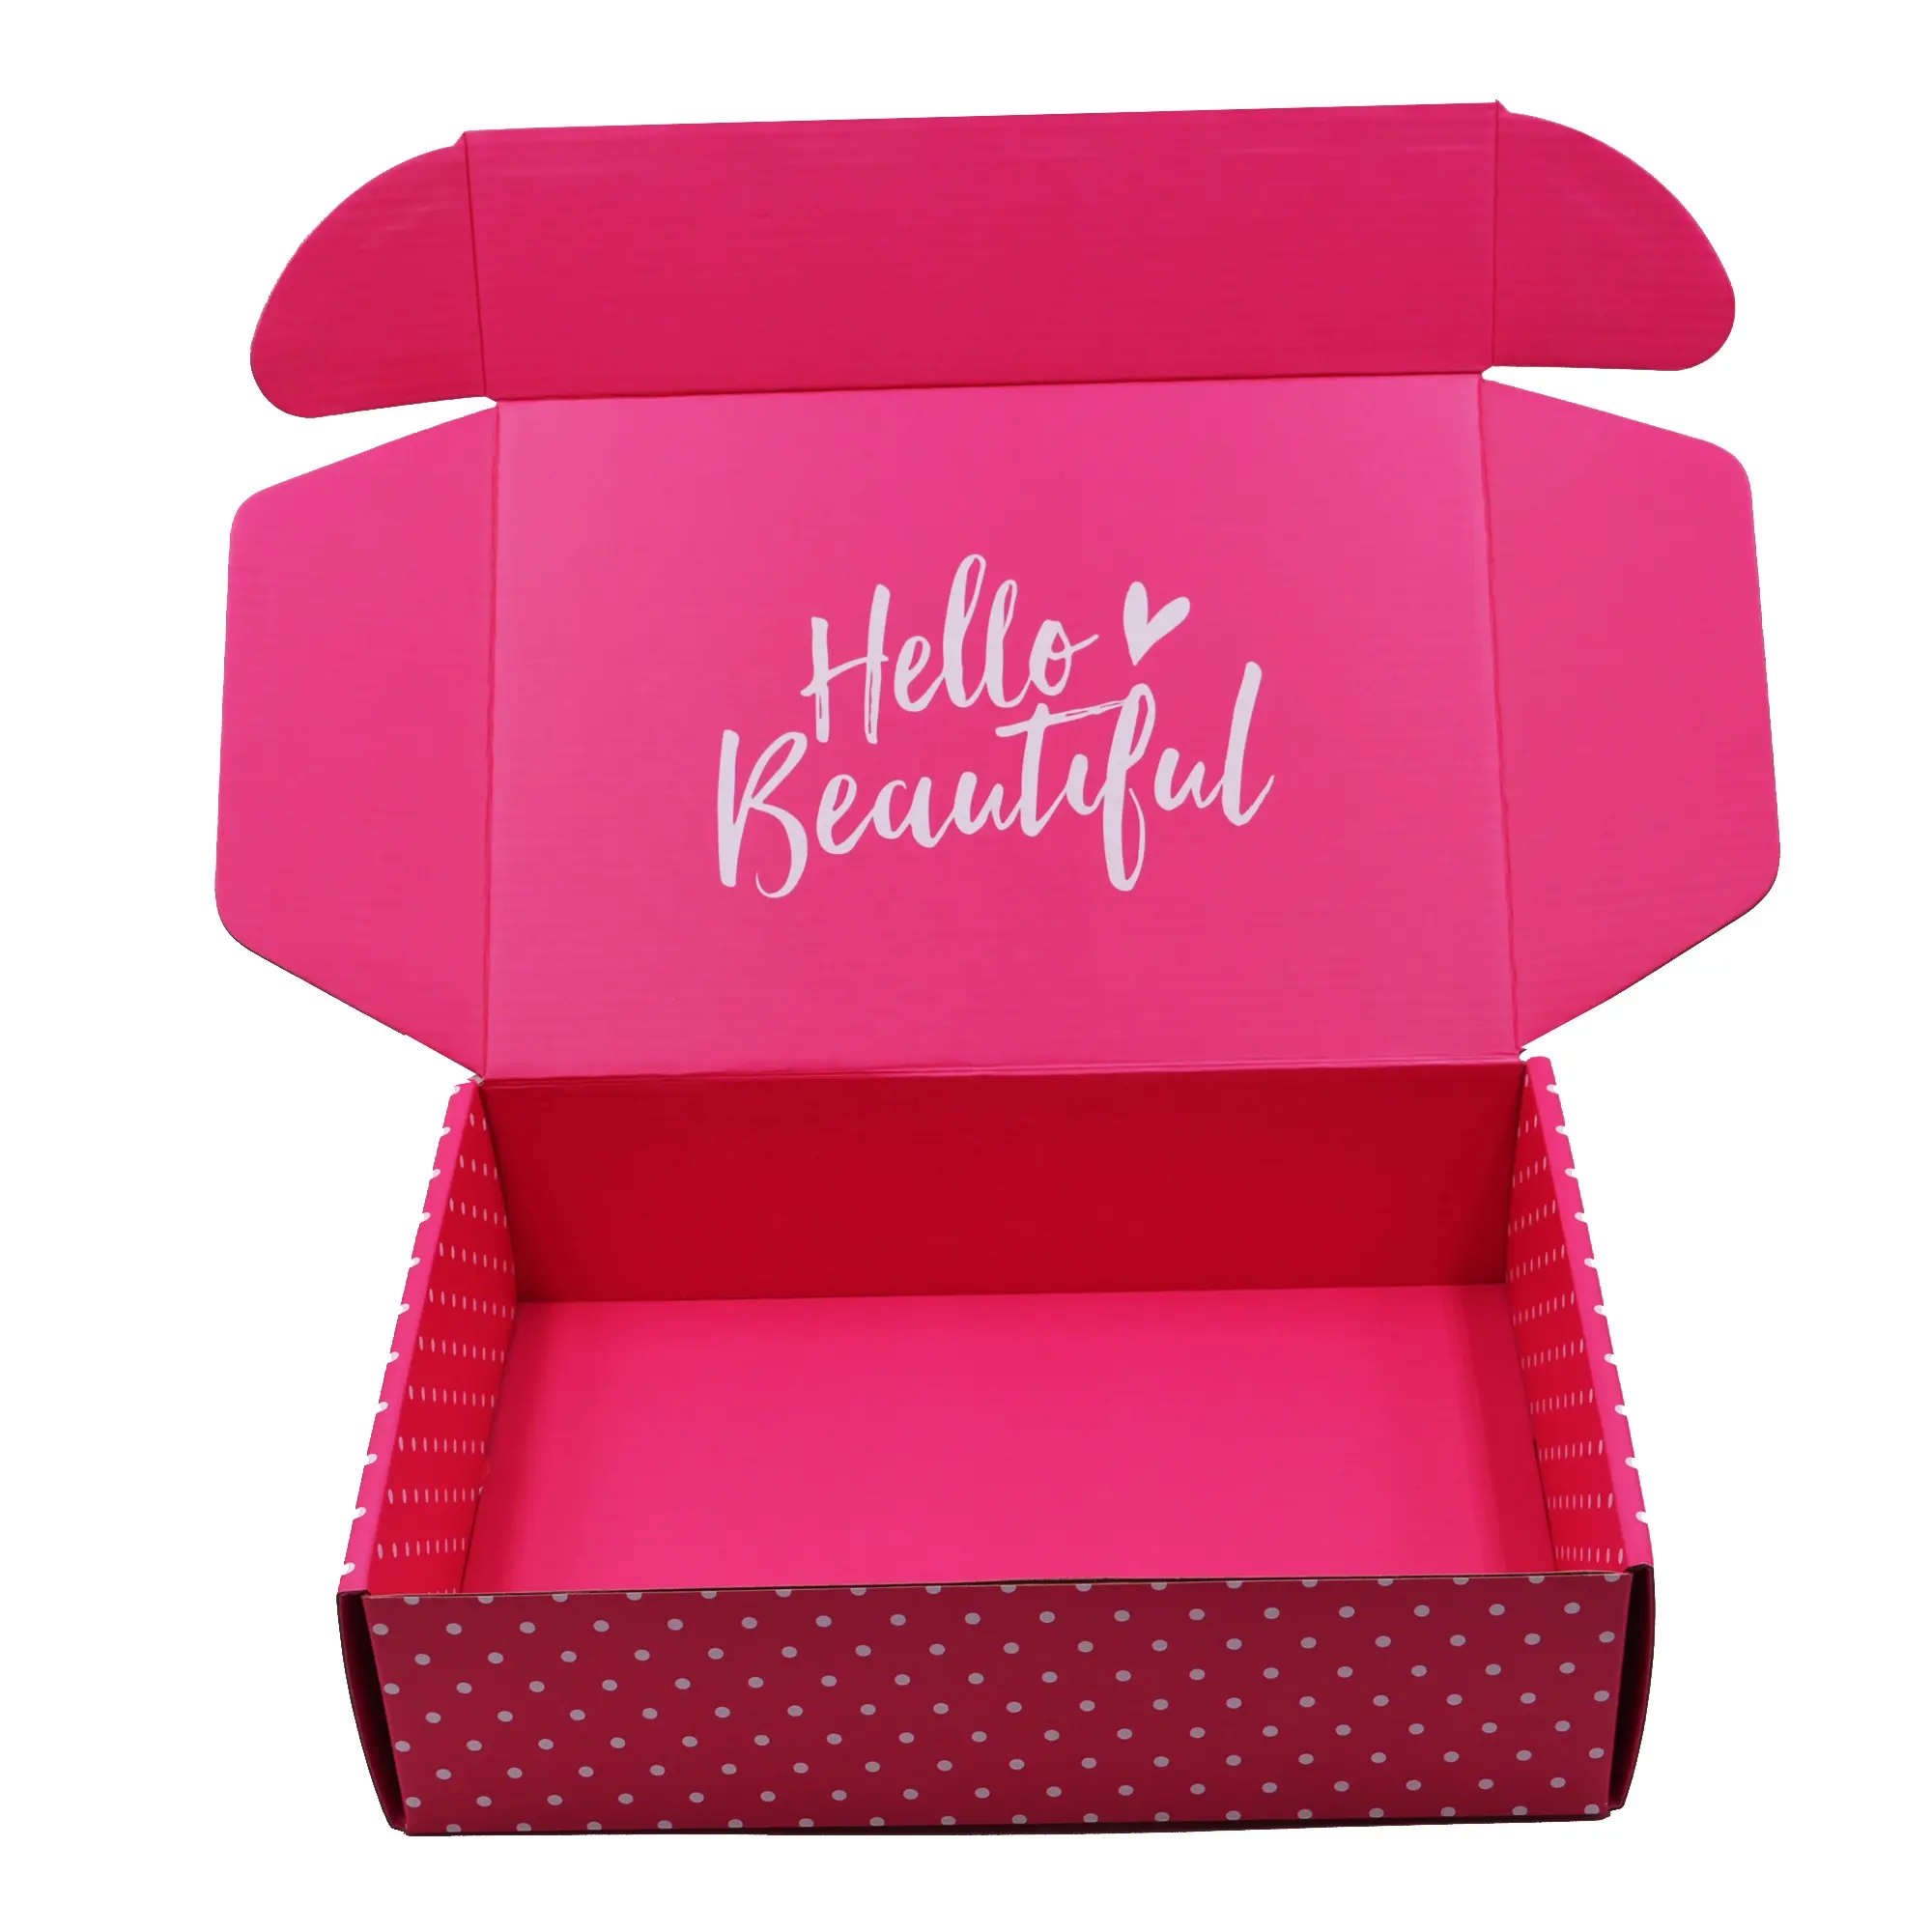 Top Sale Hot Pink Apparel Gift Box Eyelash Corrugated Paper Display Box Books Beauty Products Packaging Wig Mailer Shipping Box